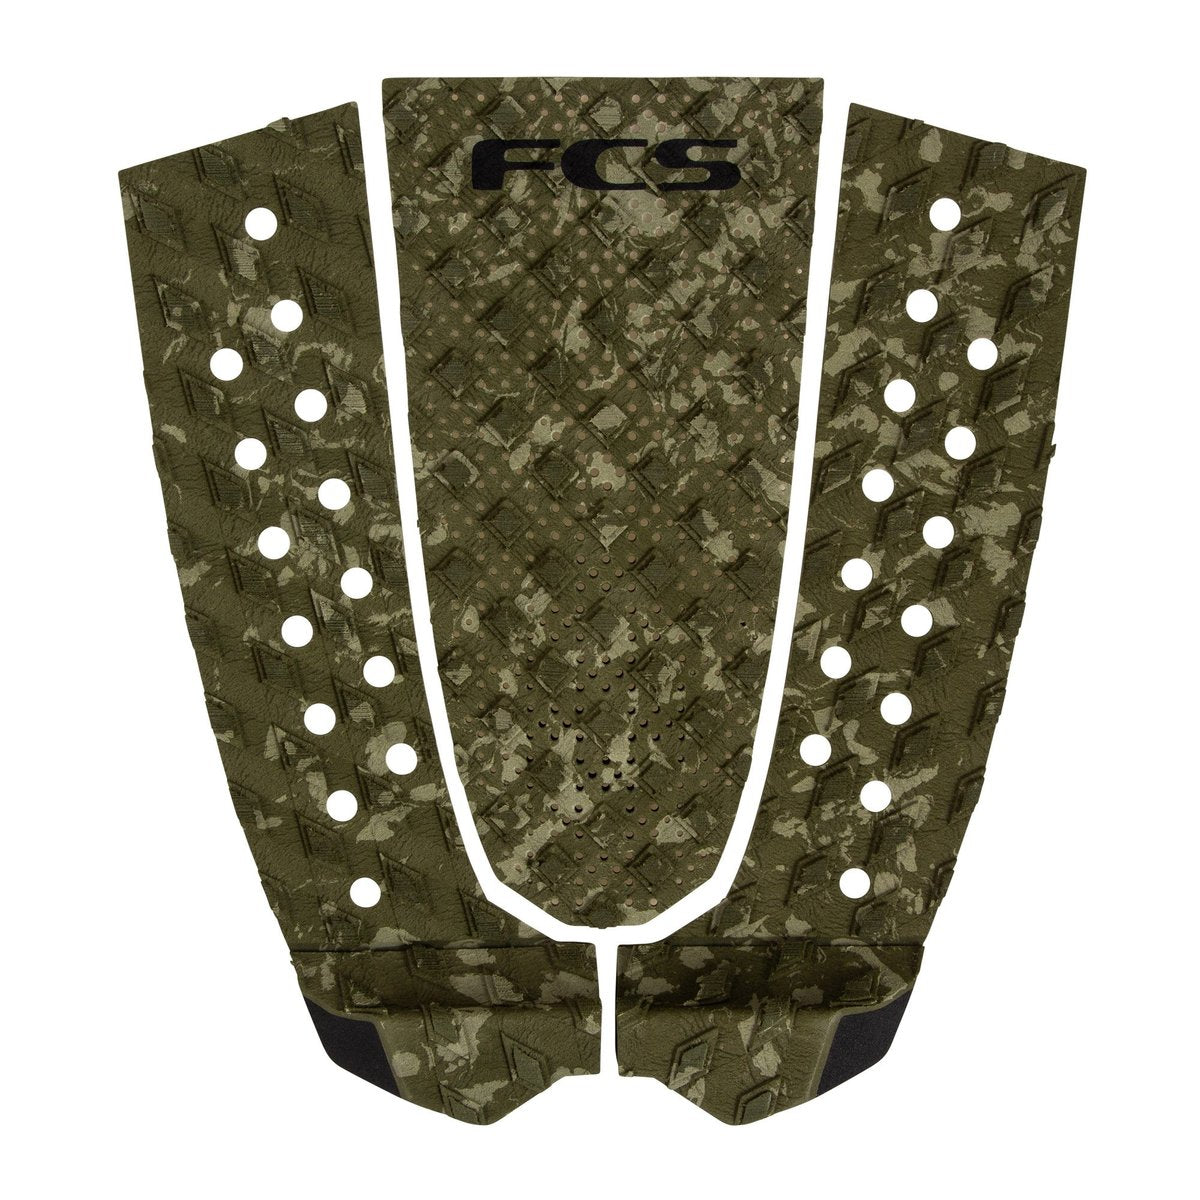 FCS T-3 Traction Pad 3 piece traction, designed to suit performance boards. Traction Pad Olive Fleck Camo